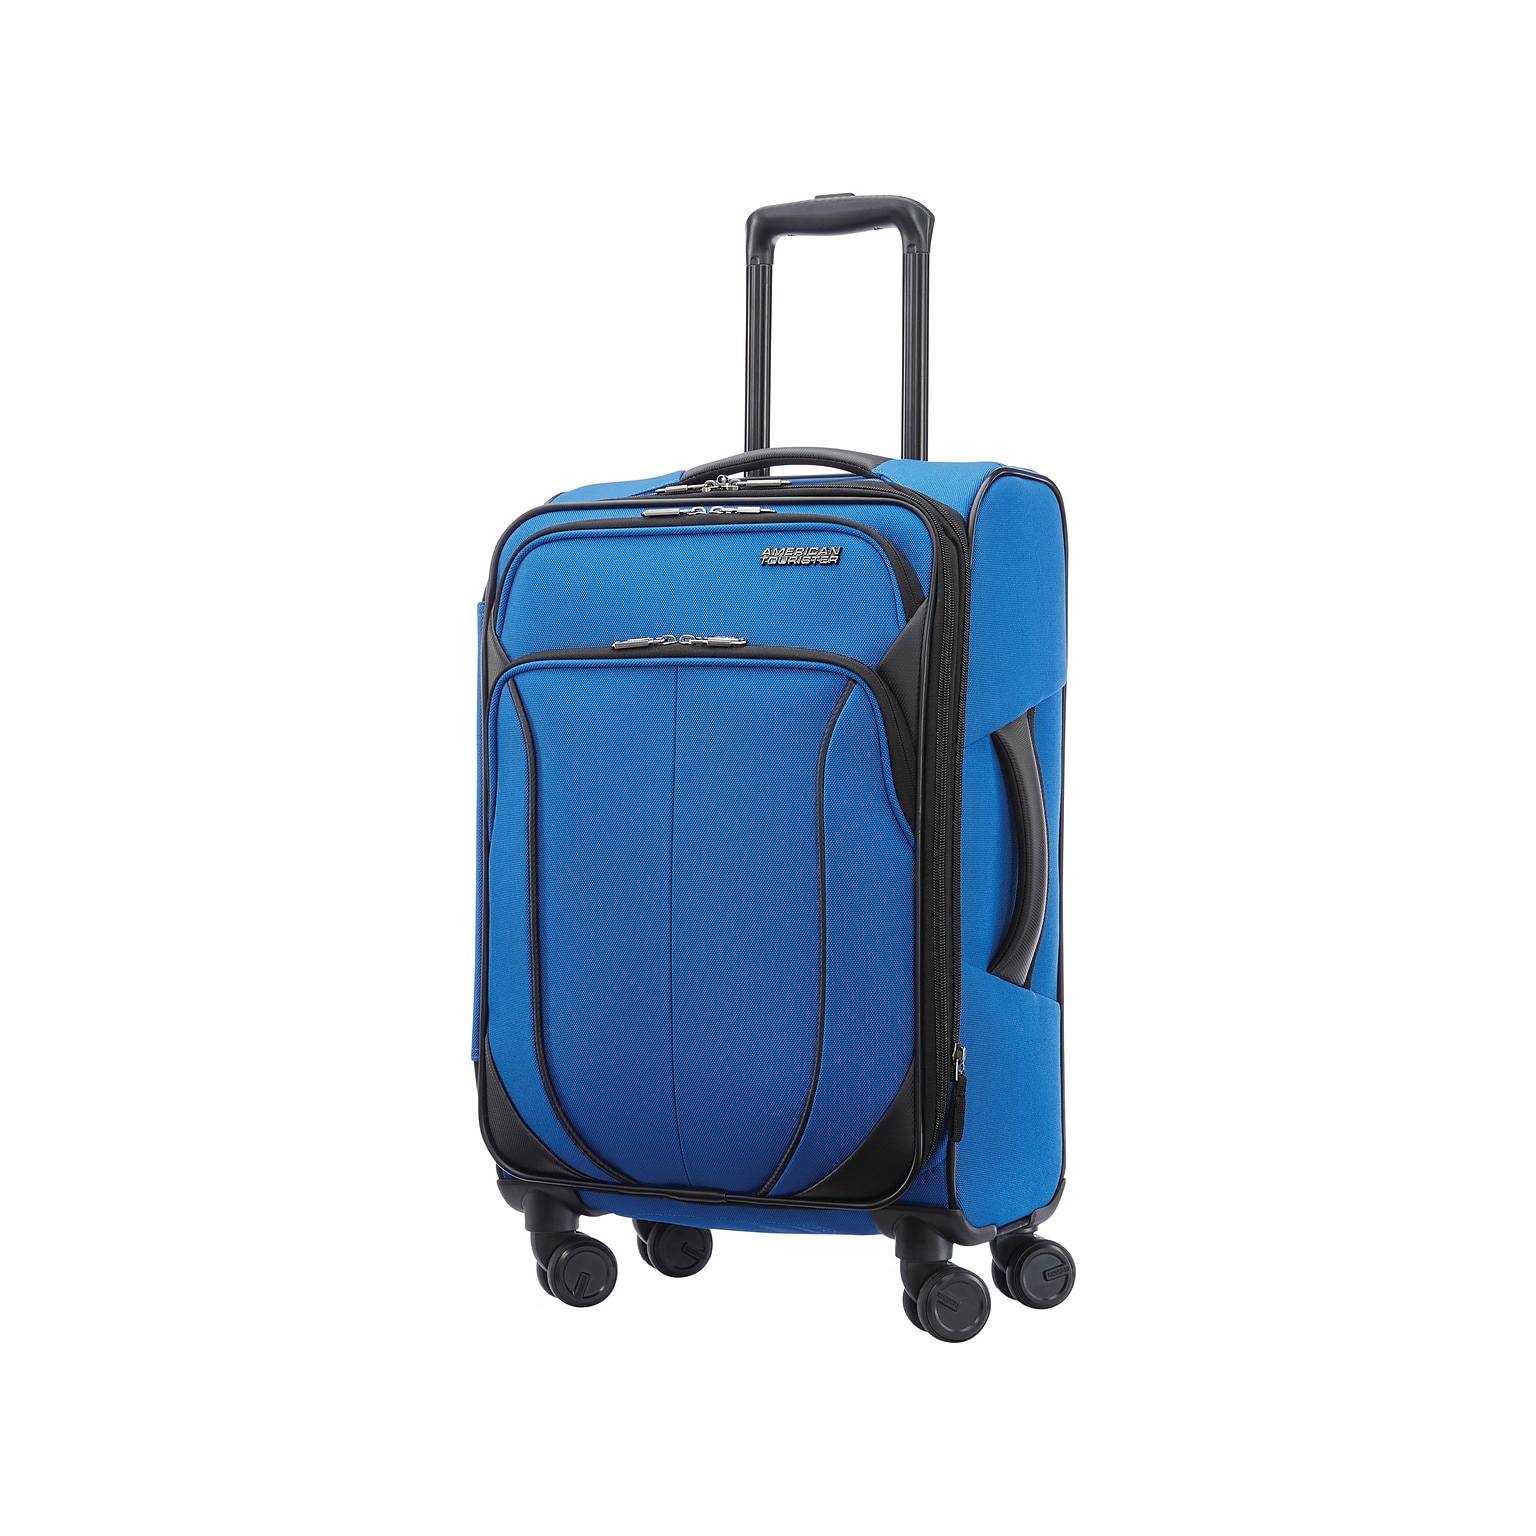 American Tourister 4 Kix 2.0 Polyester Carry-On Luggage, Classic Blue (142352-6188)